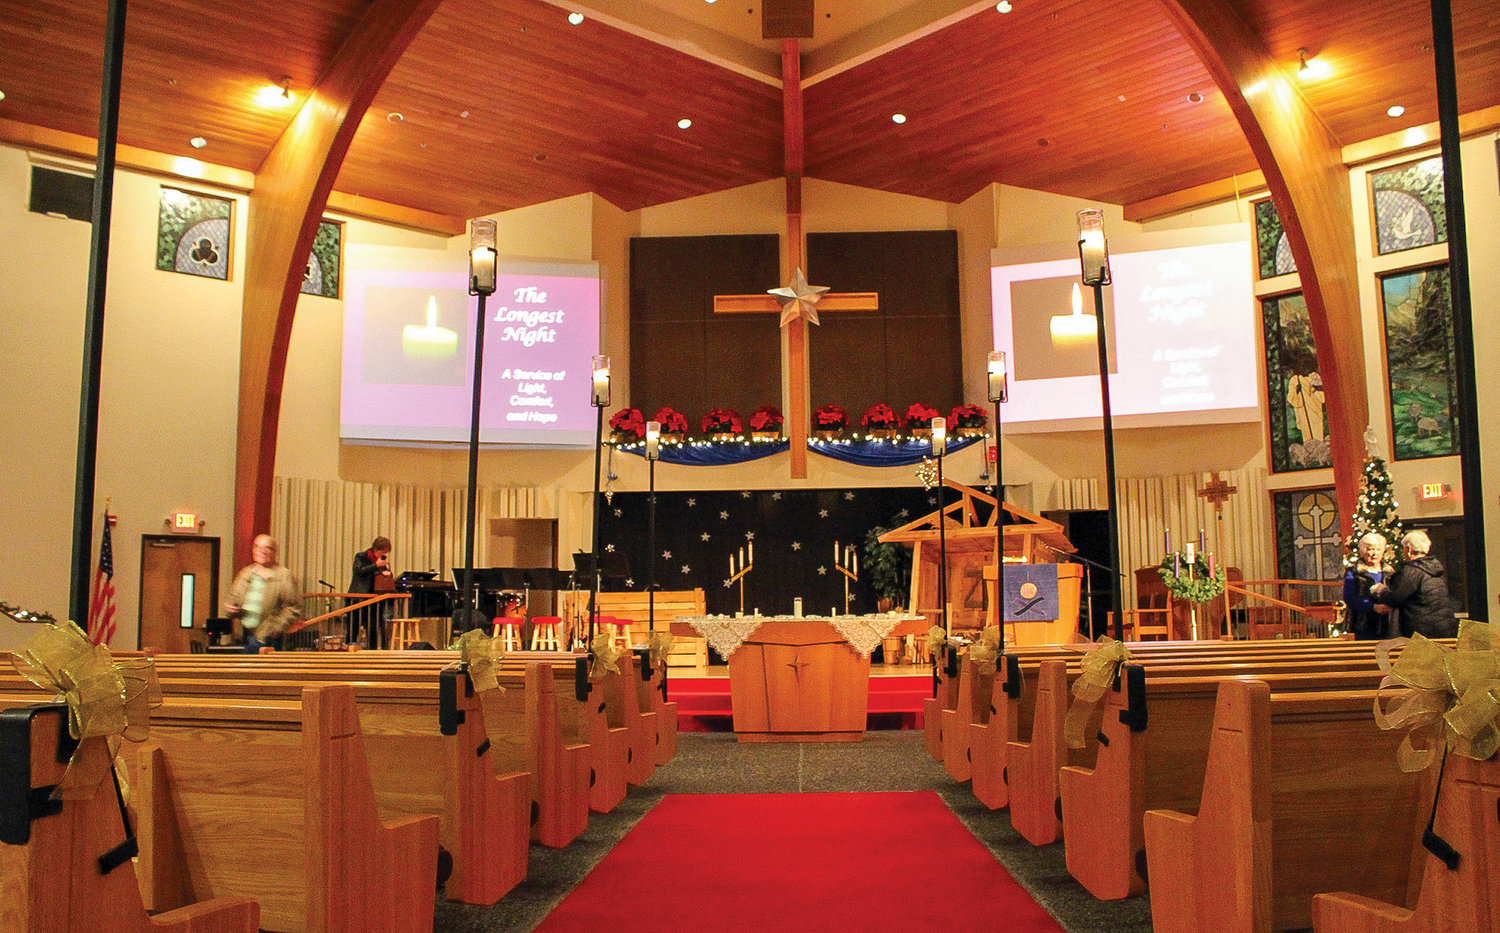 The Longest Night service is held at St. John Lutheran Church.